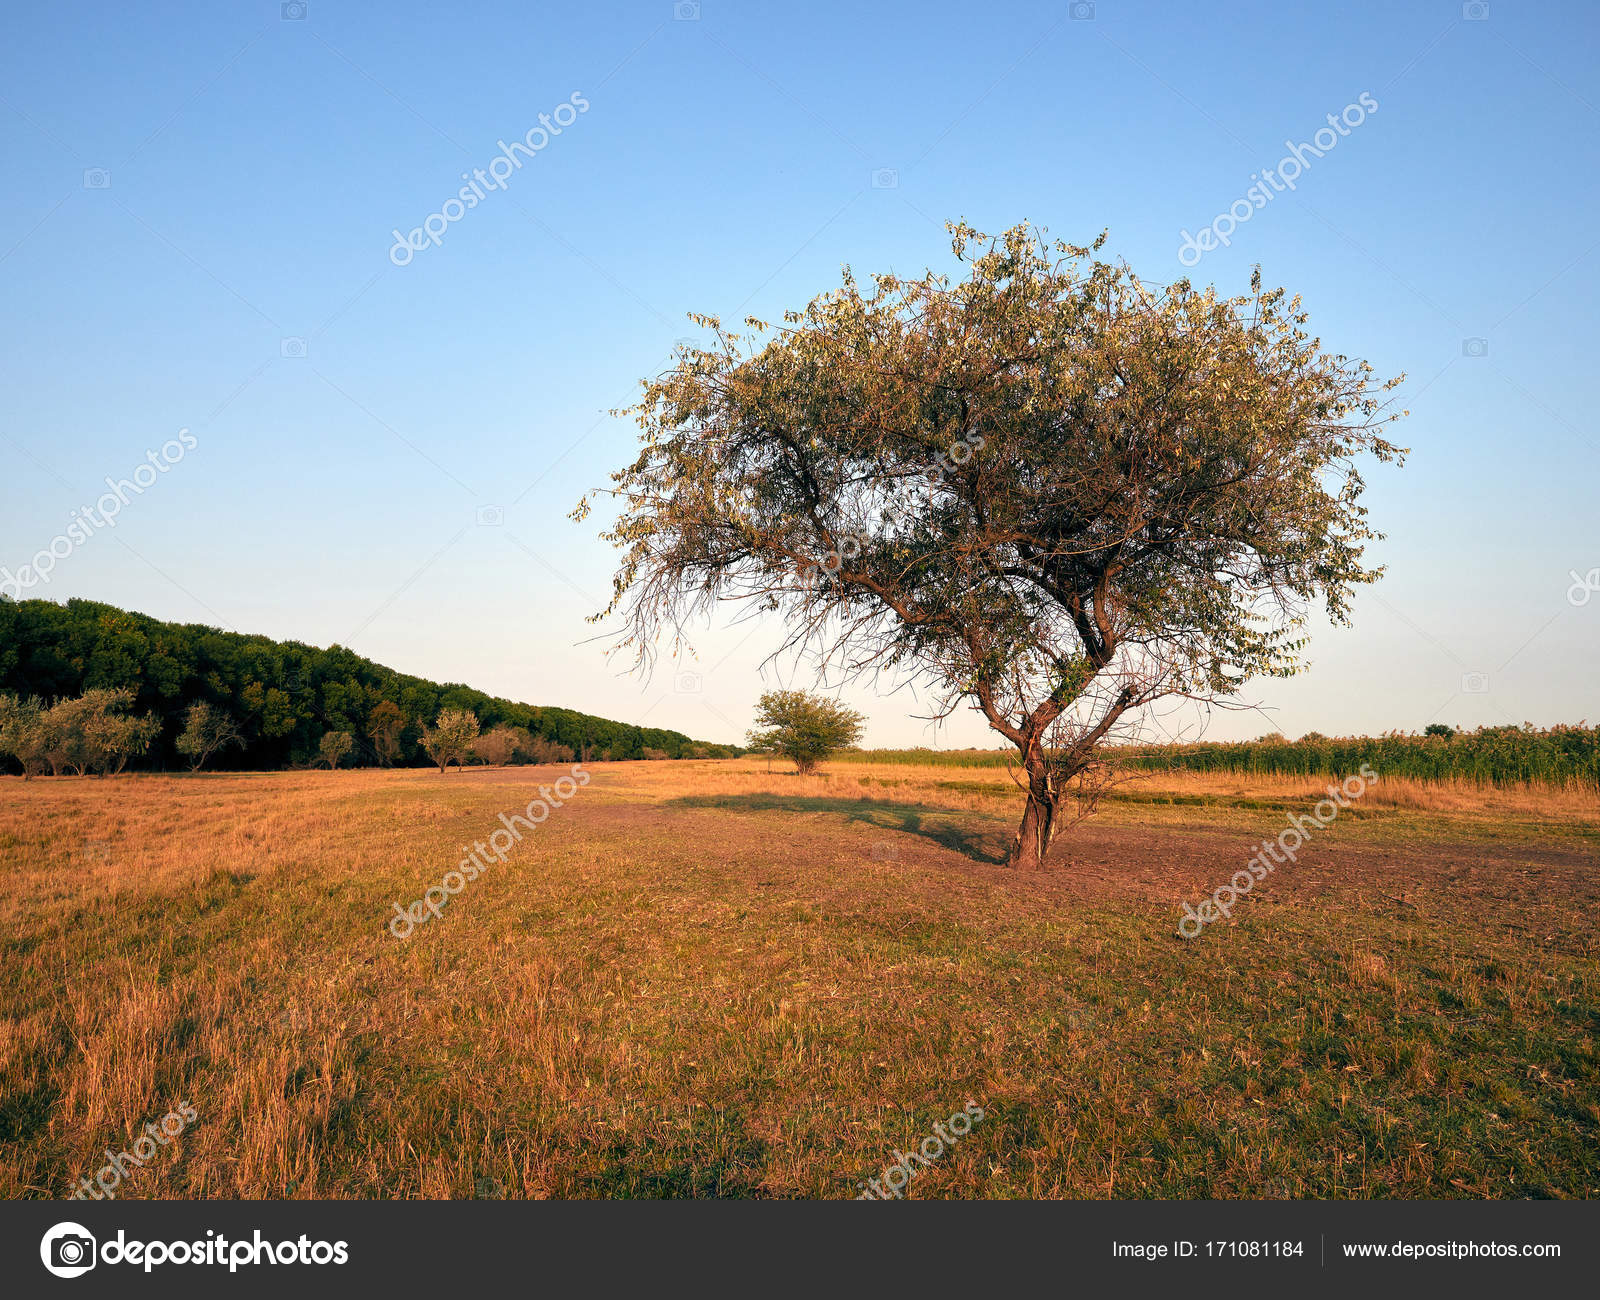 Lonely Tree in a Yellow Field — Stock Photo © Kulichok #171081184